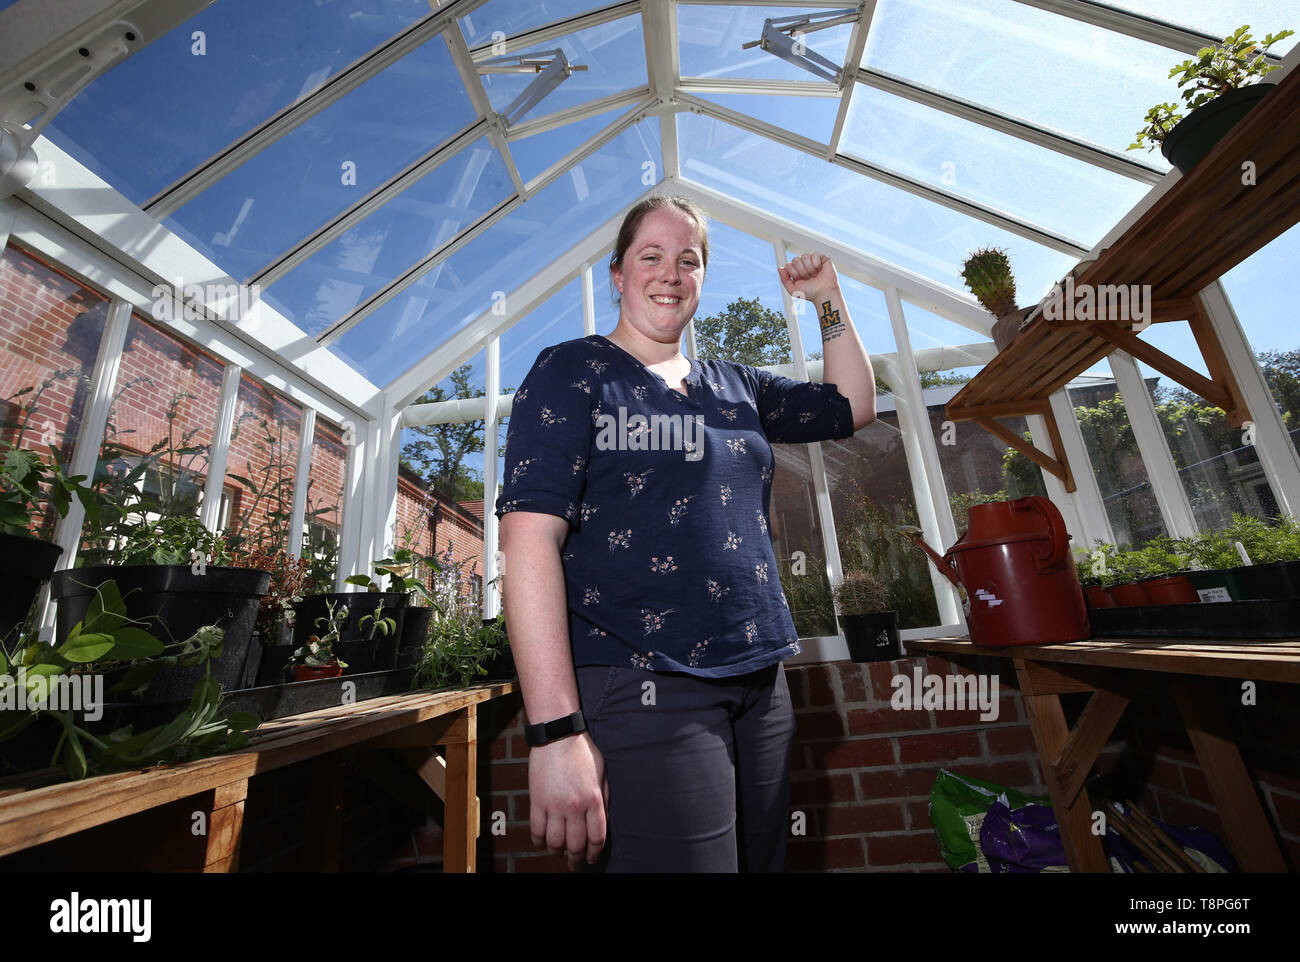 Former RAF medic and now staff member Rachel Williamson, who used to be a patient at the Defence Medical Rehab Centre's former site in Headley Court, and who also took part in the Invictus Games in Sydney - winning two gold medals, three silvers and one bronze - pictured in the Neuro garden during a media tour of the Defence Medical Rehab Centre (DMRC), which has opened its doors to the media for the first time since relocating to the Stanford Hall Rehabilitation Estate near Loughborough. Stock Photo